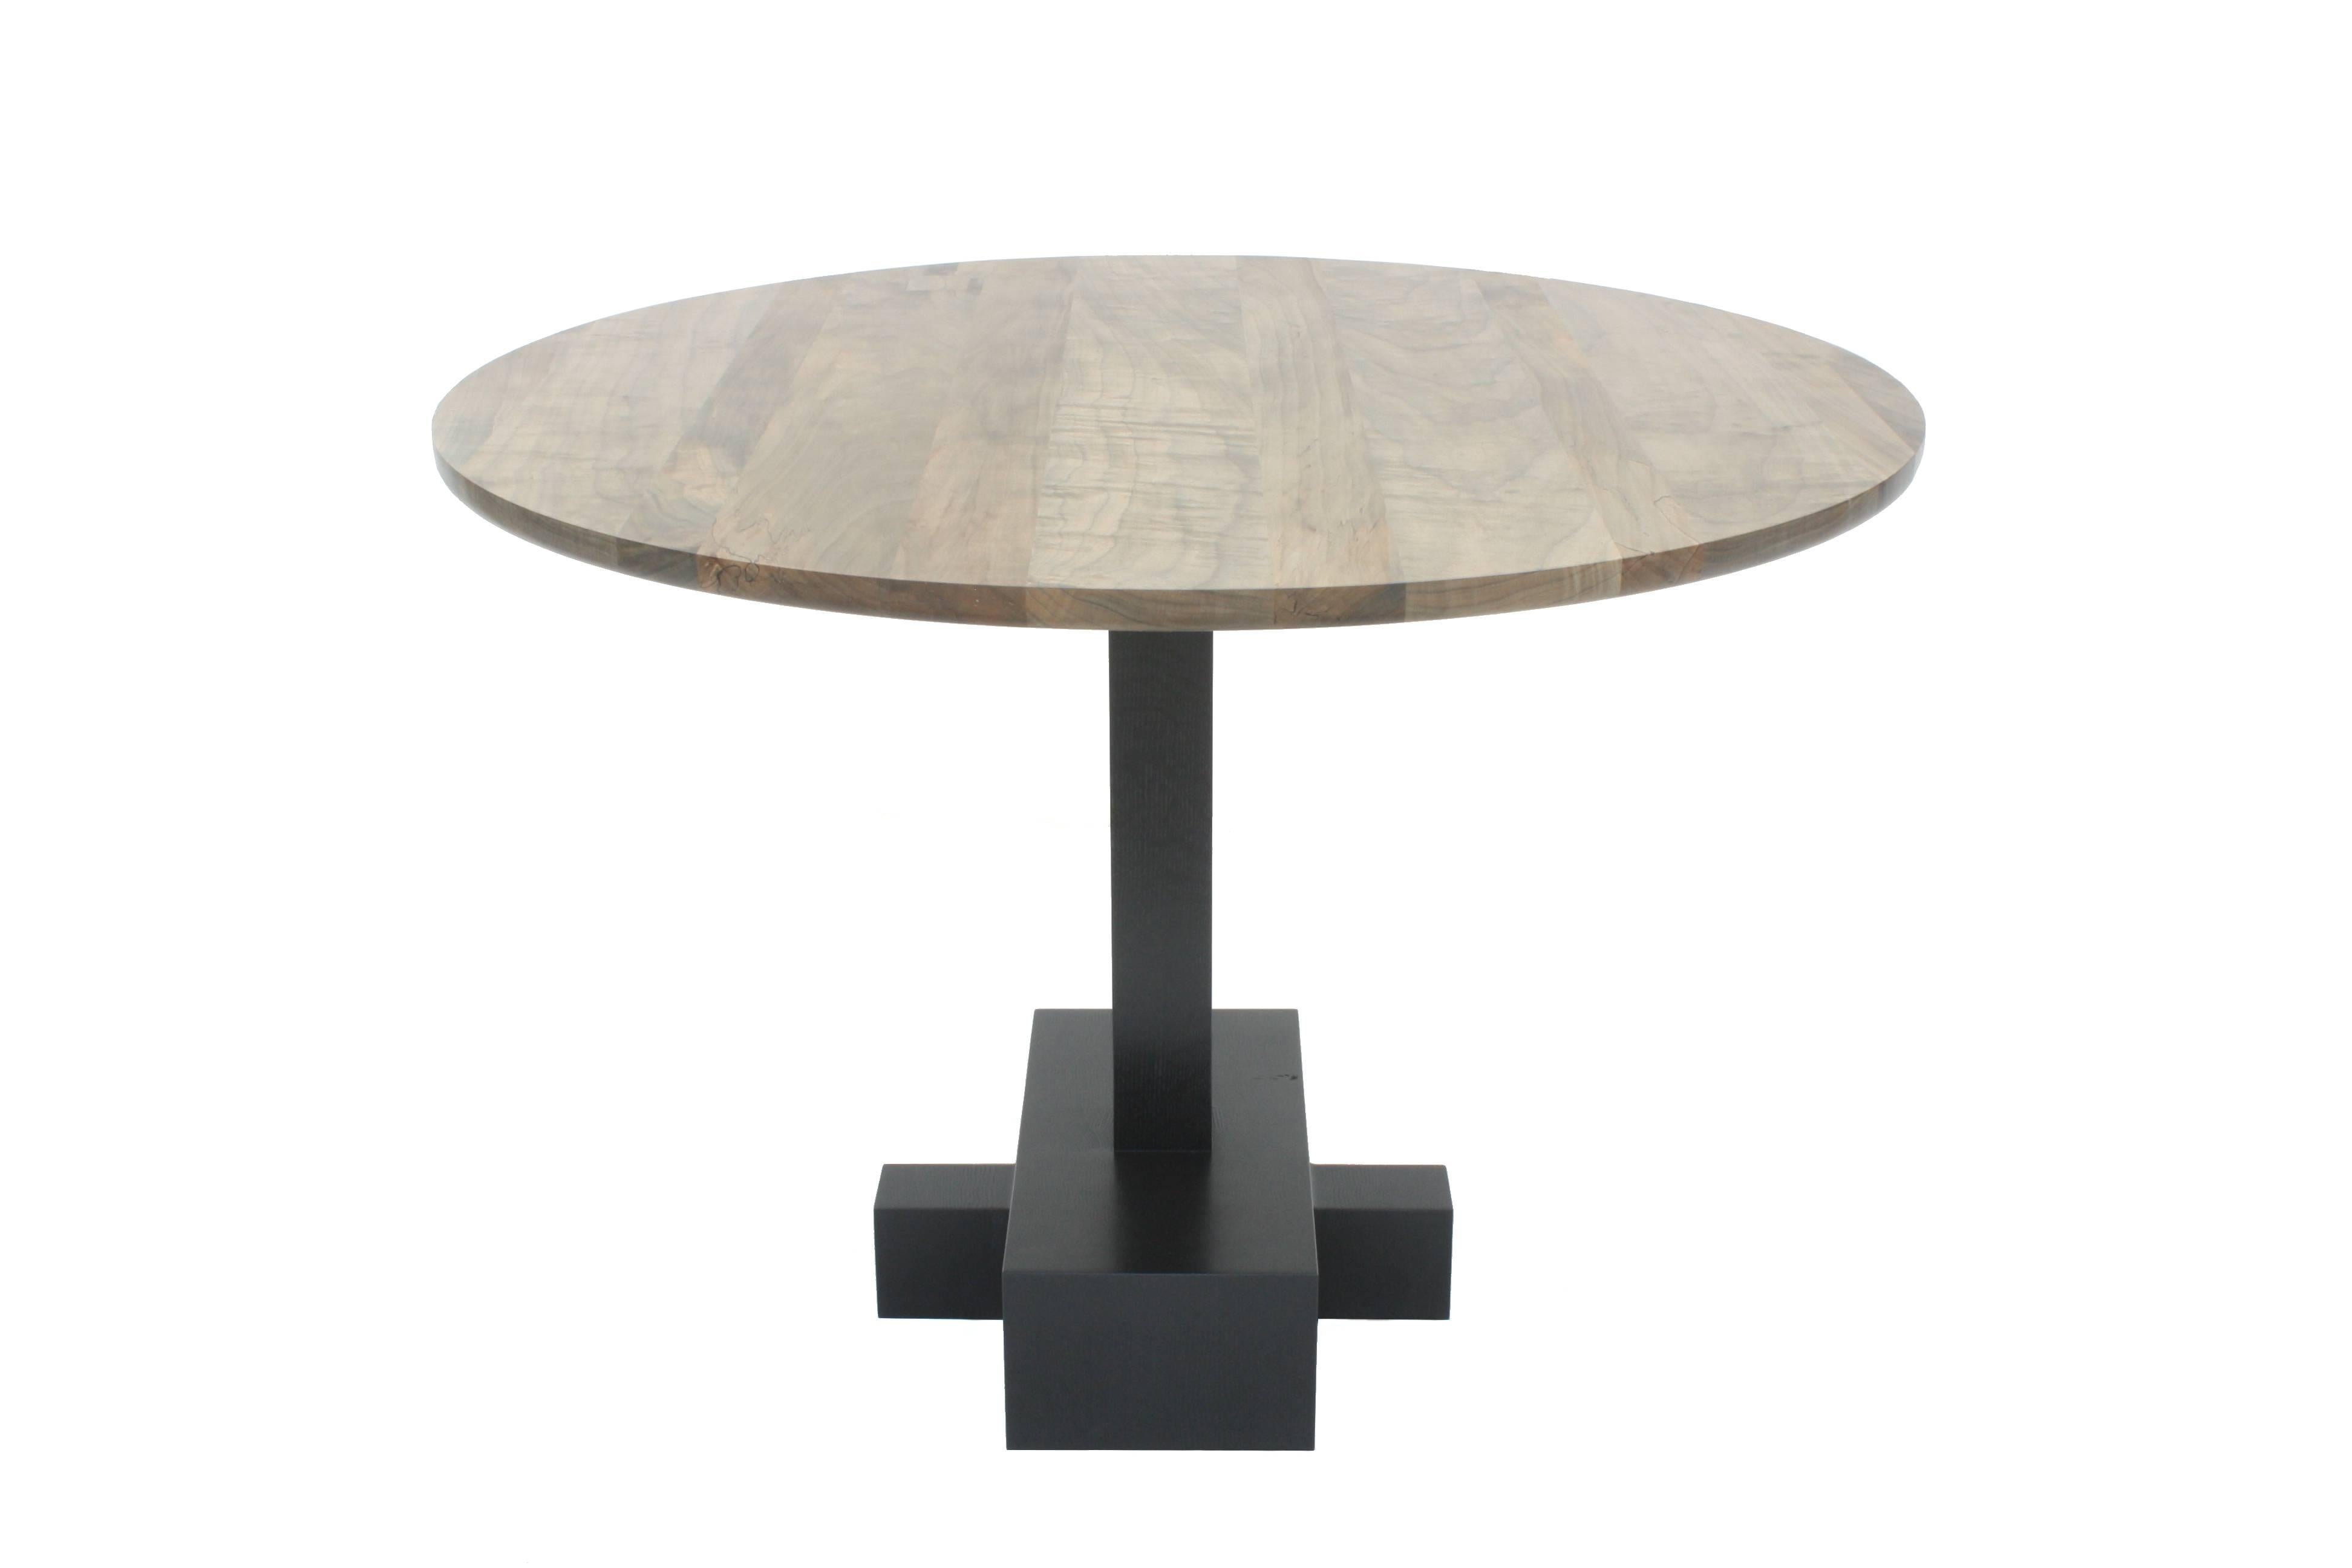 Handmade in Chicago by Laylo Studio, this customizable pedestal table features a stack laminated, solid wood pedestal base with an under-beveled, 42